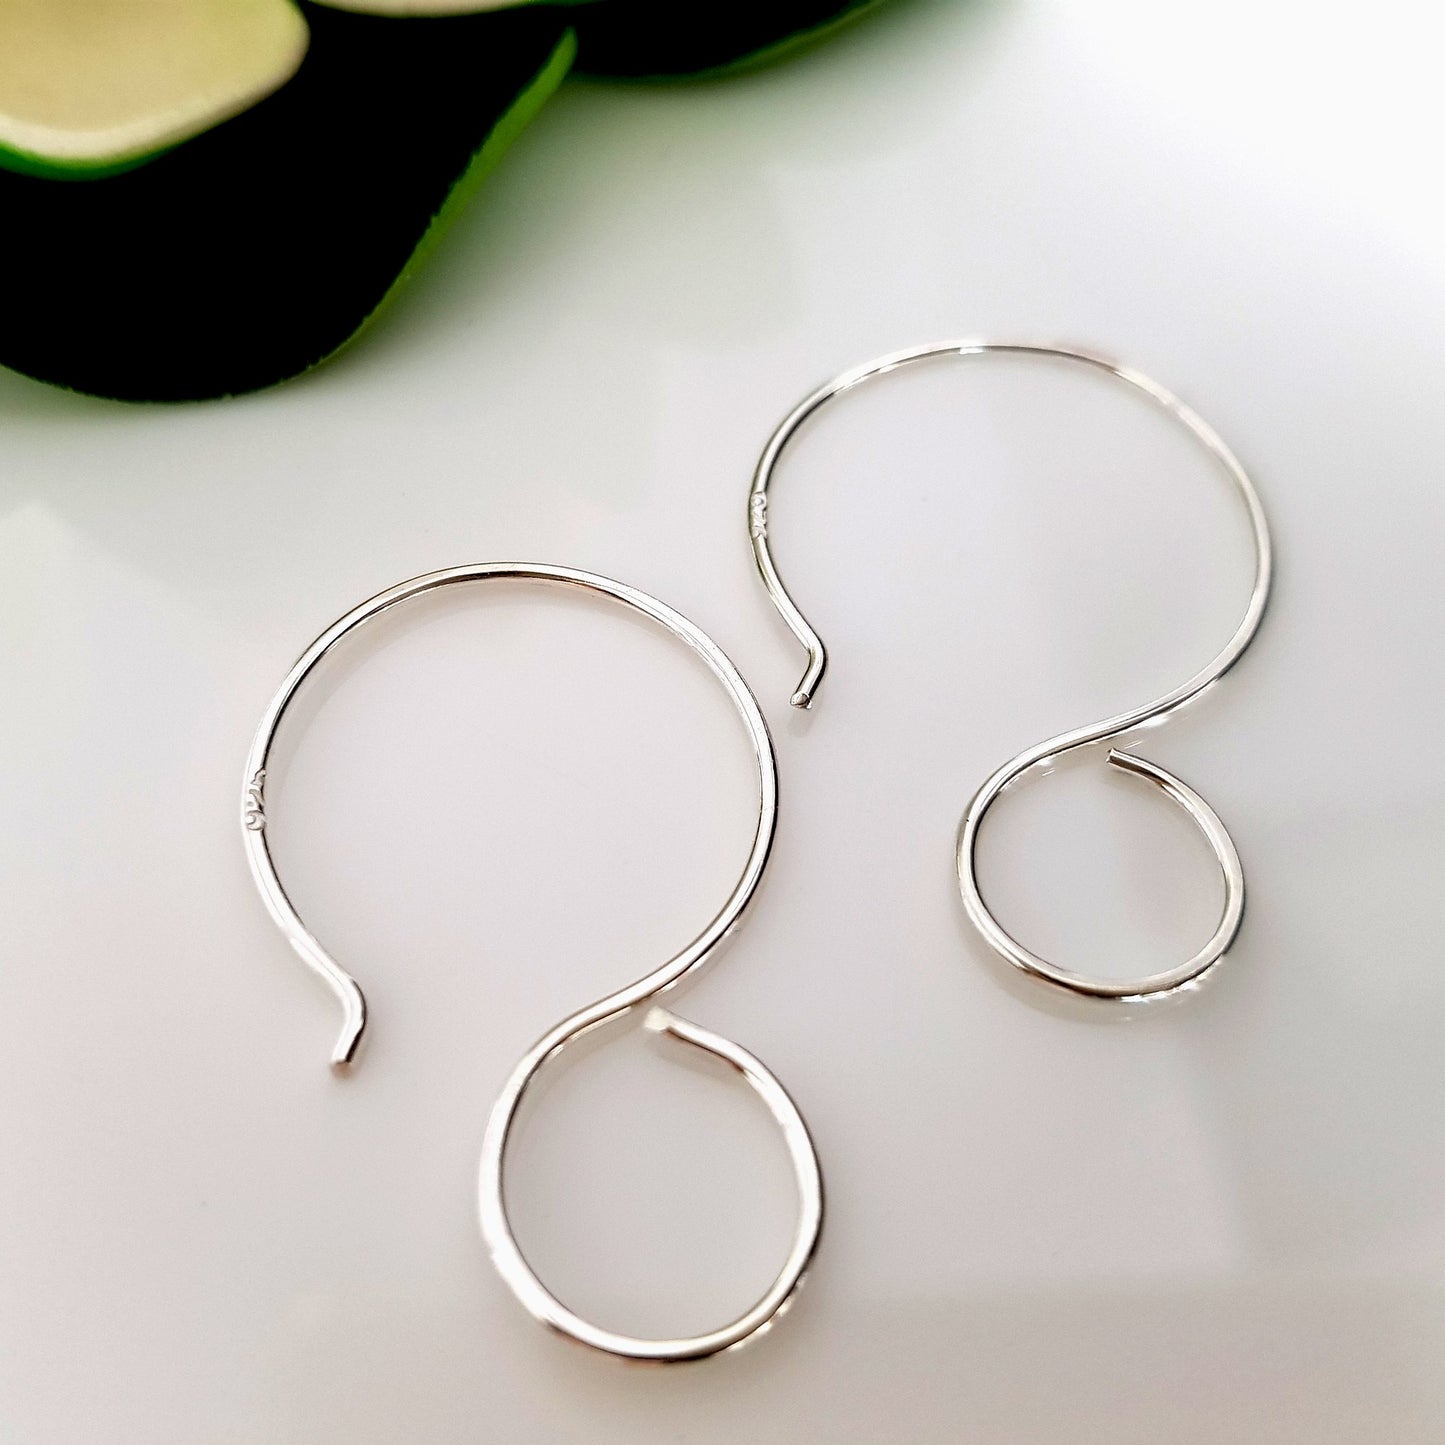 Handmade Silver 925 Large Hanging Loop Earring Wires for Polymer, Resin and Wood Design Earrings - Kalitheo Earring Findings